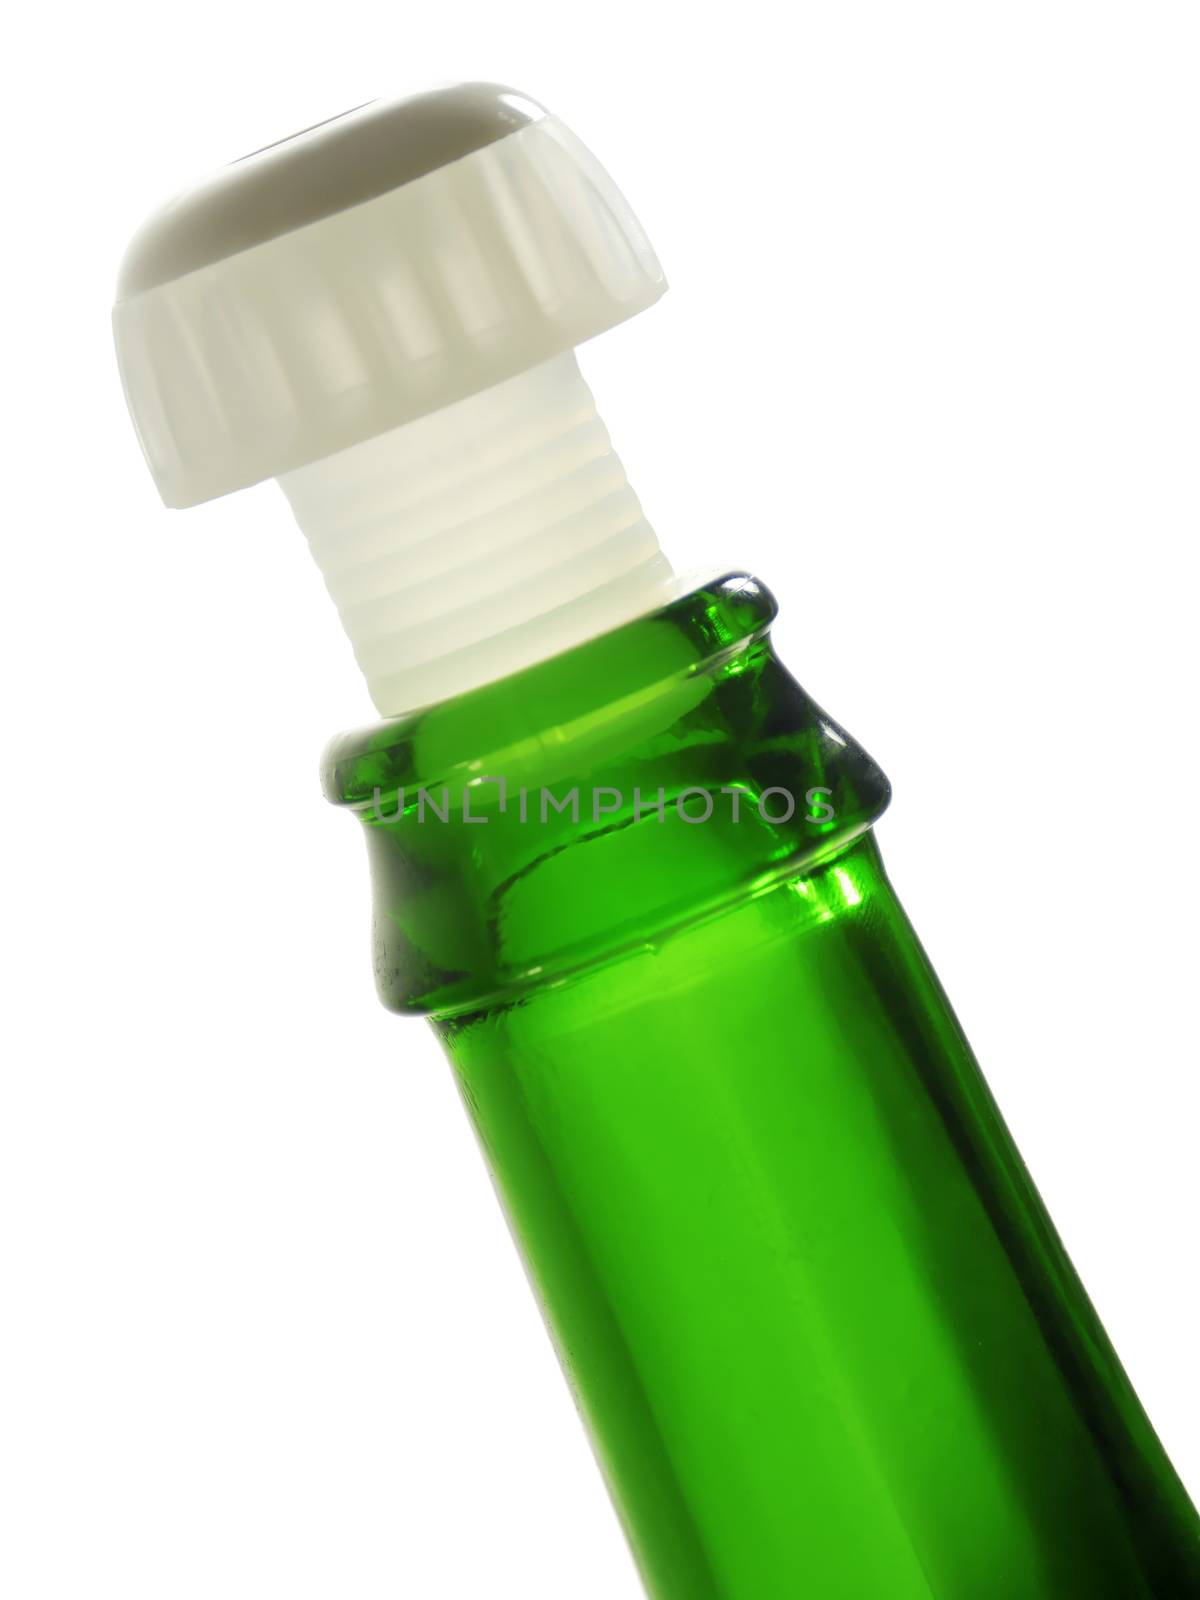 Rim of green empty bottle with plastic cork, isolated on white.